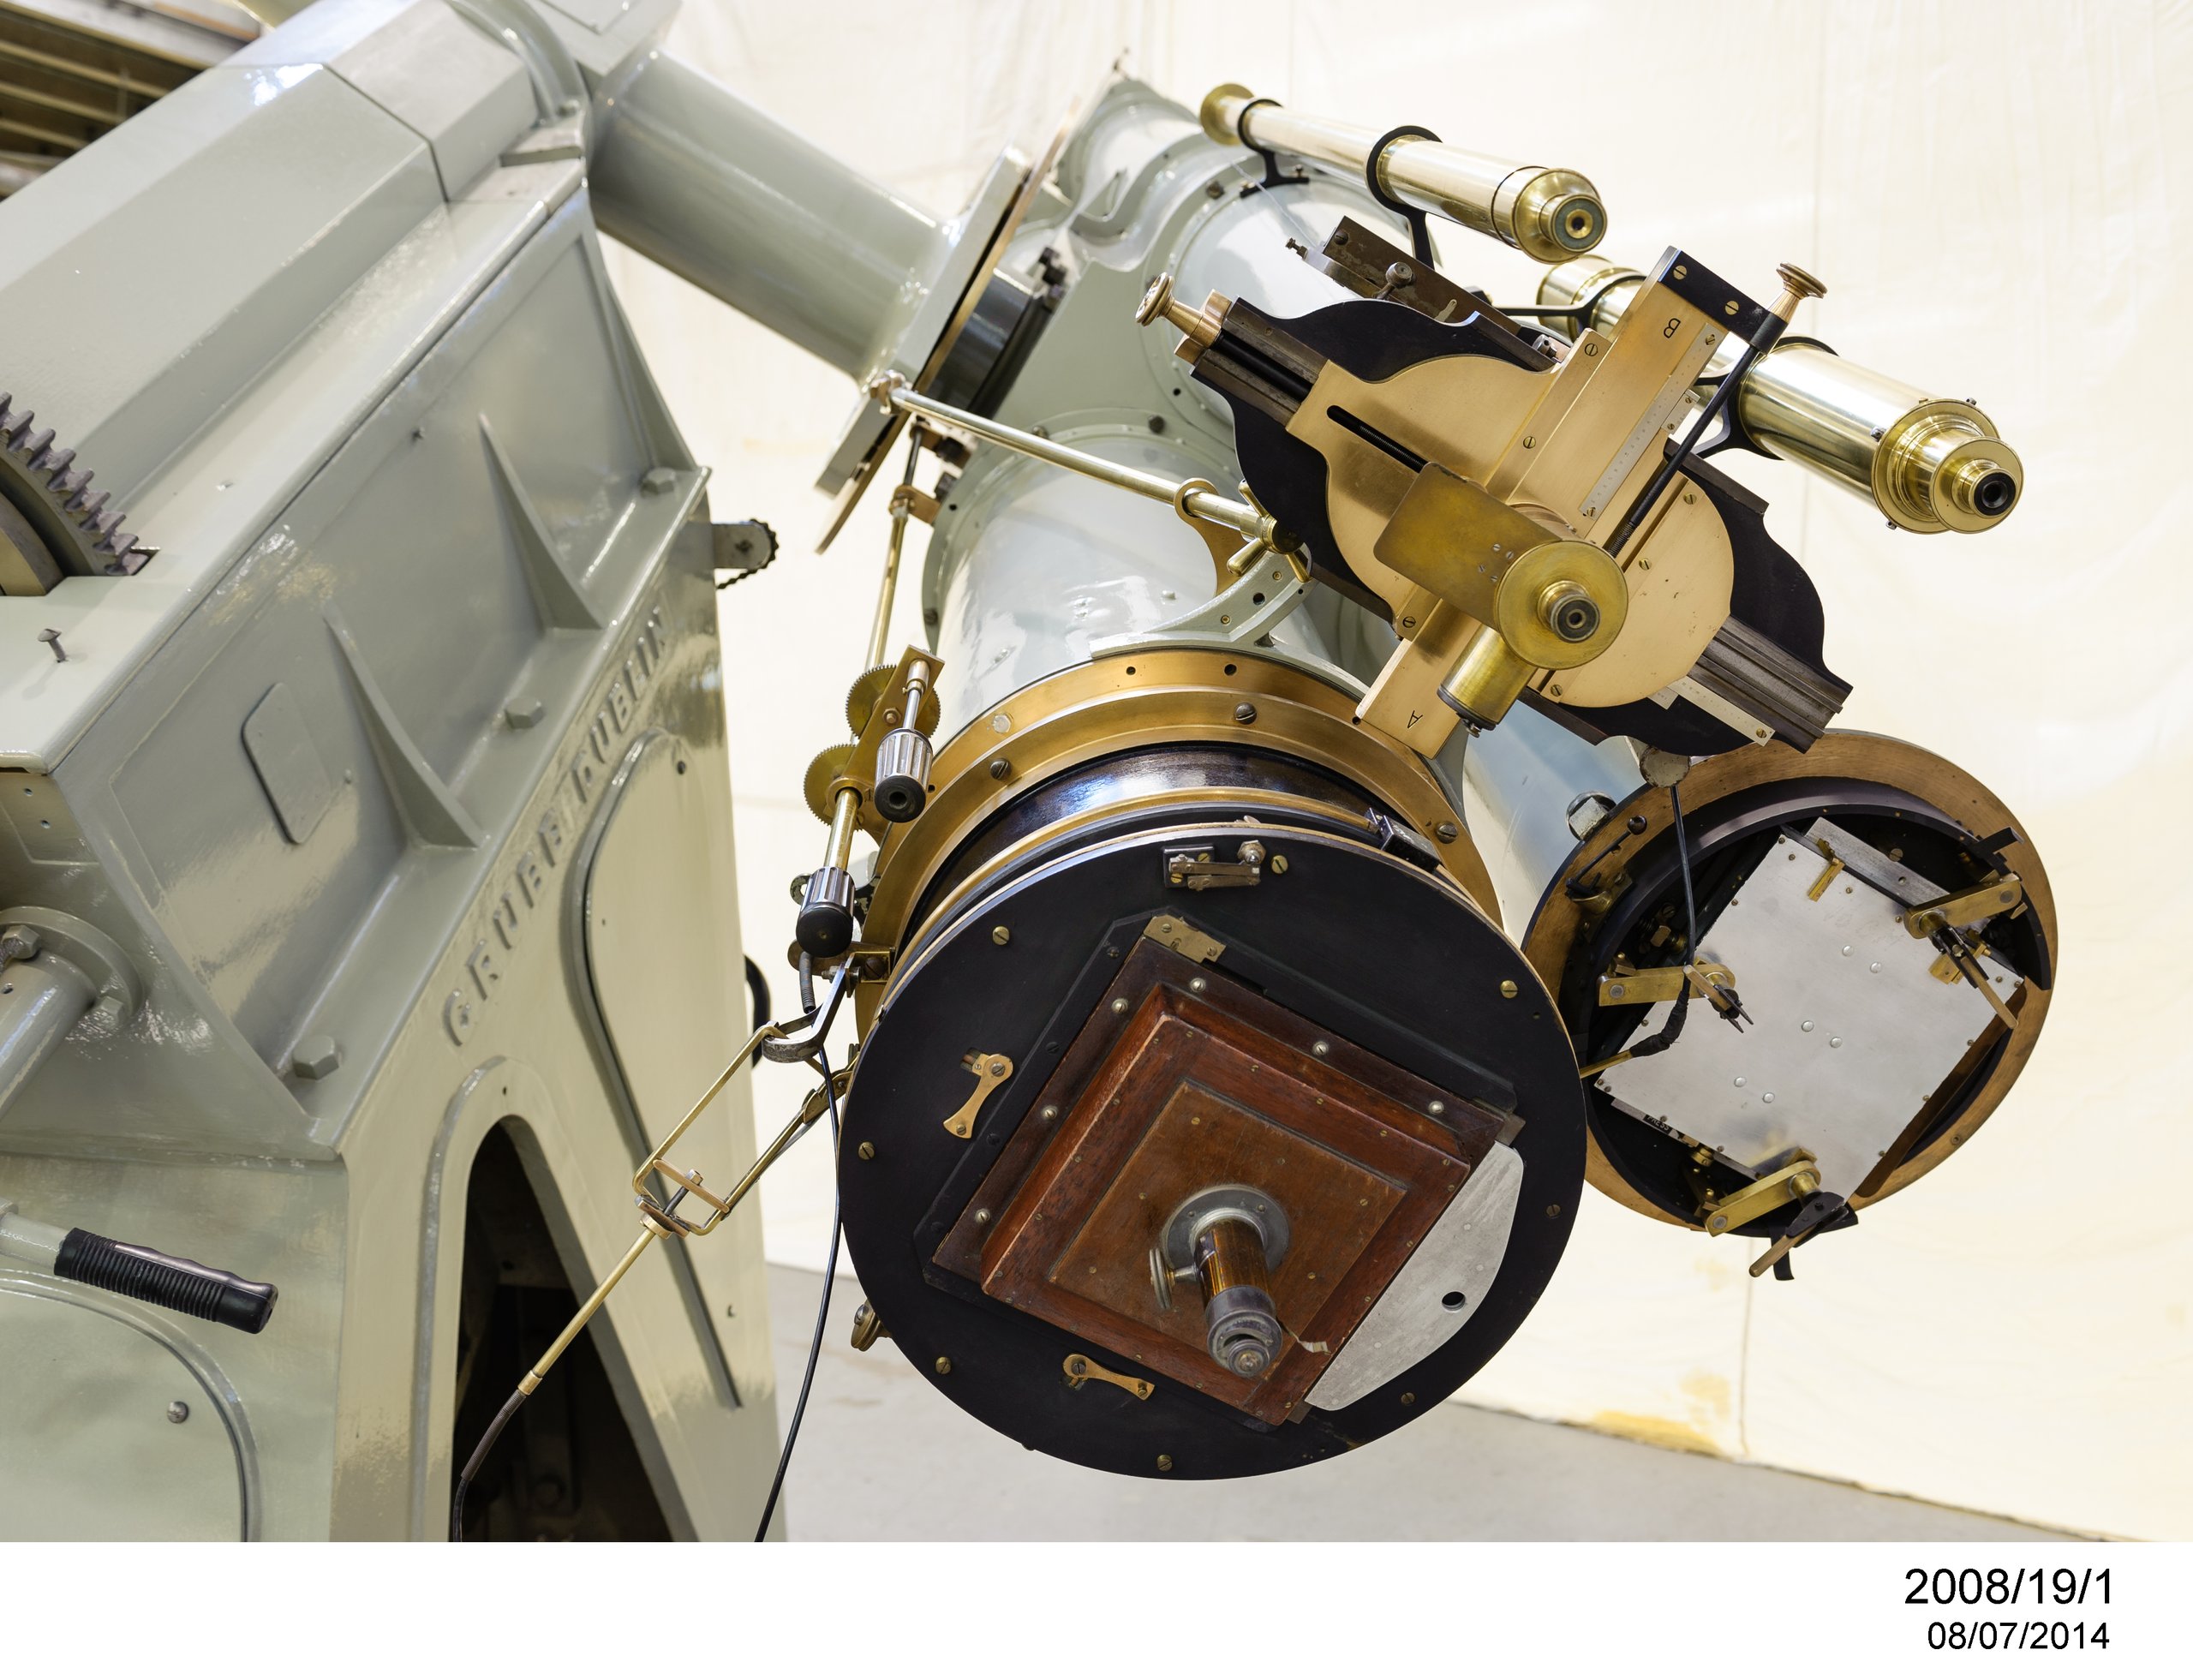 13-inch Melbourne astrographic telescope made by Howard Grubb